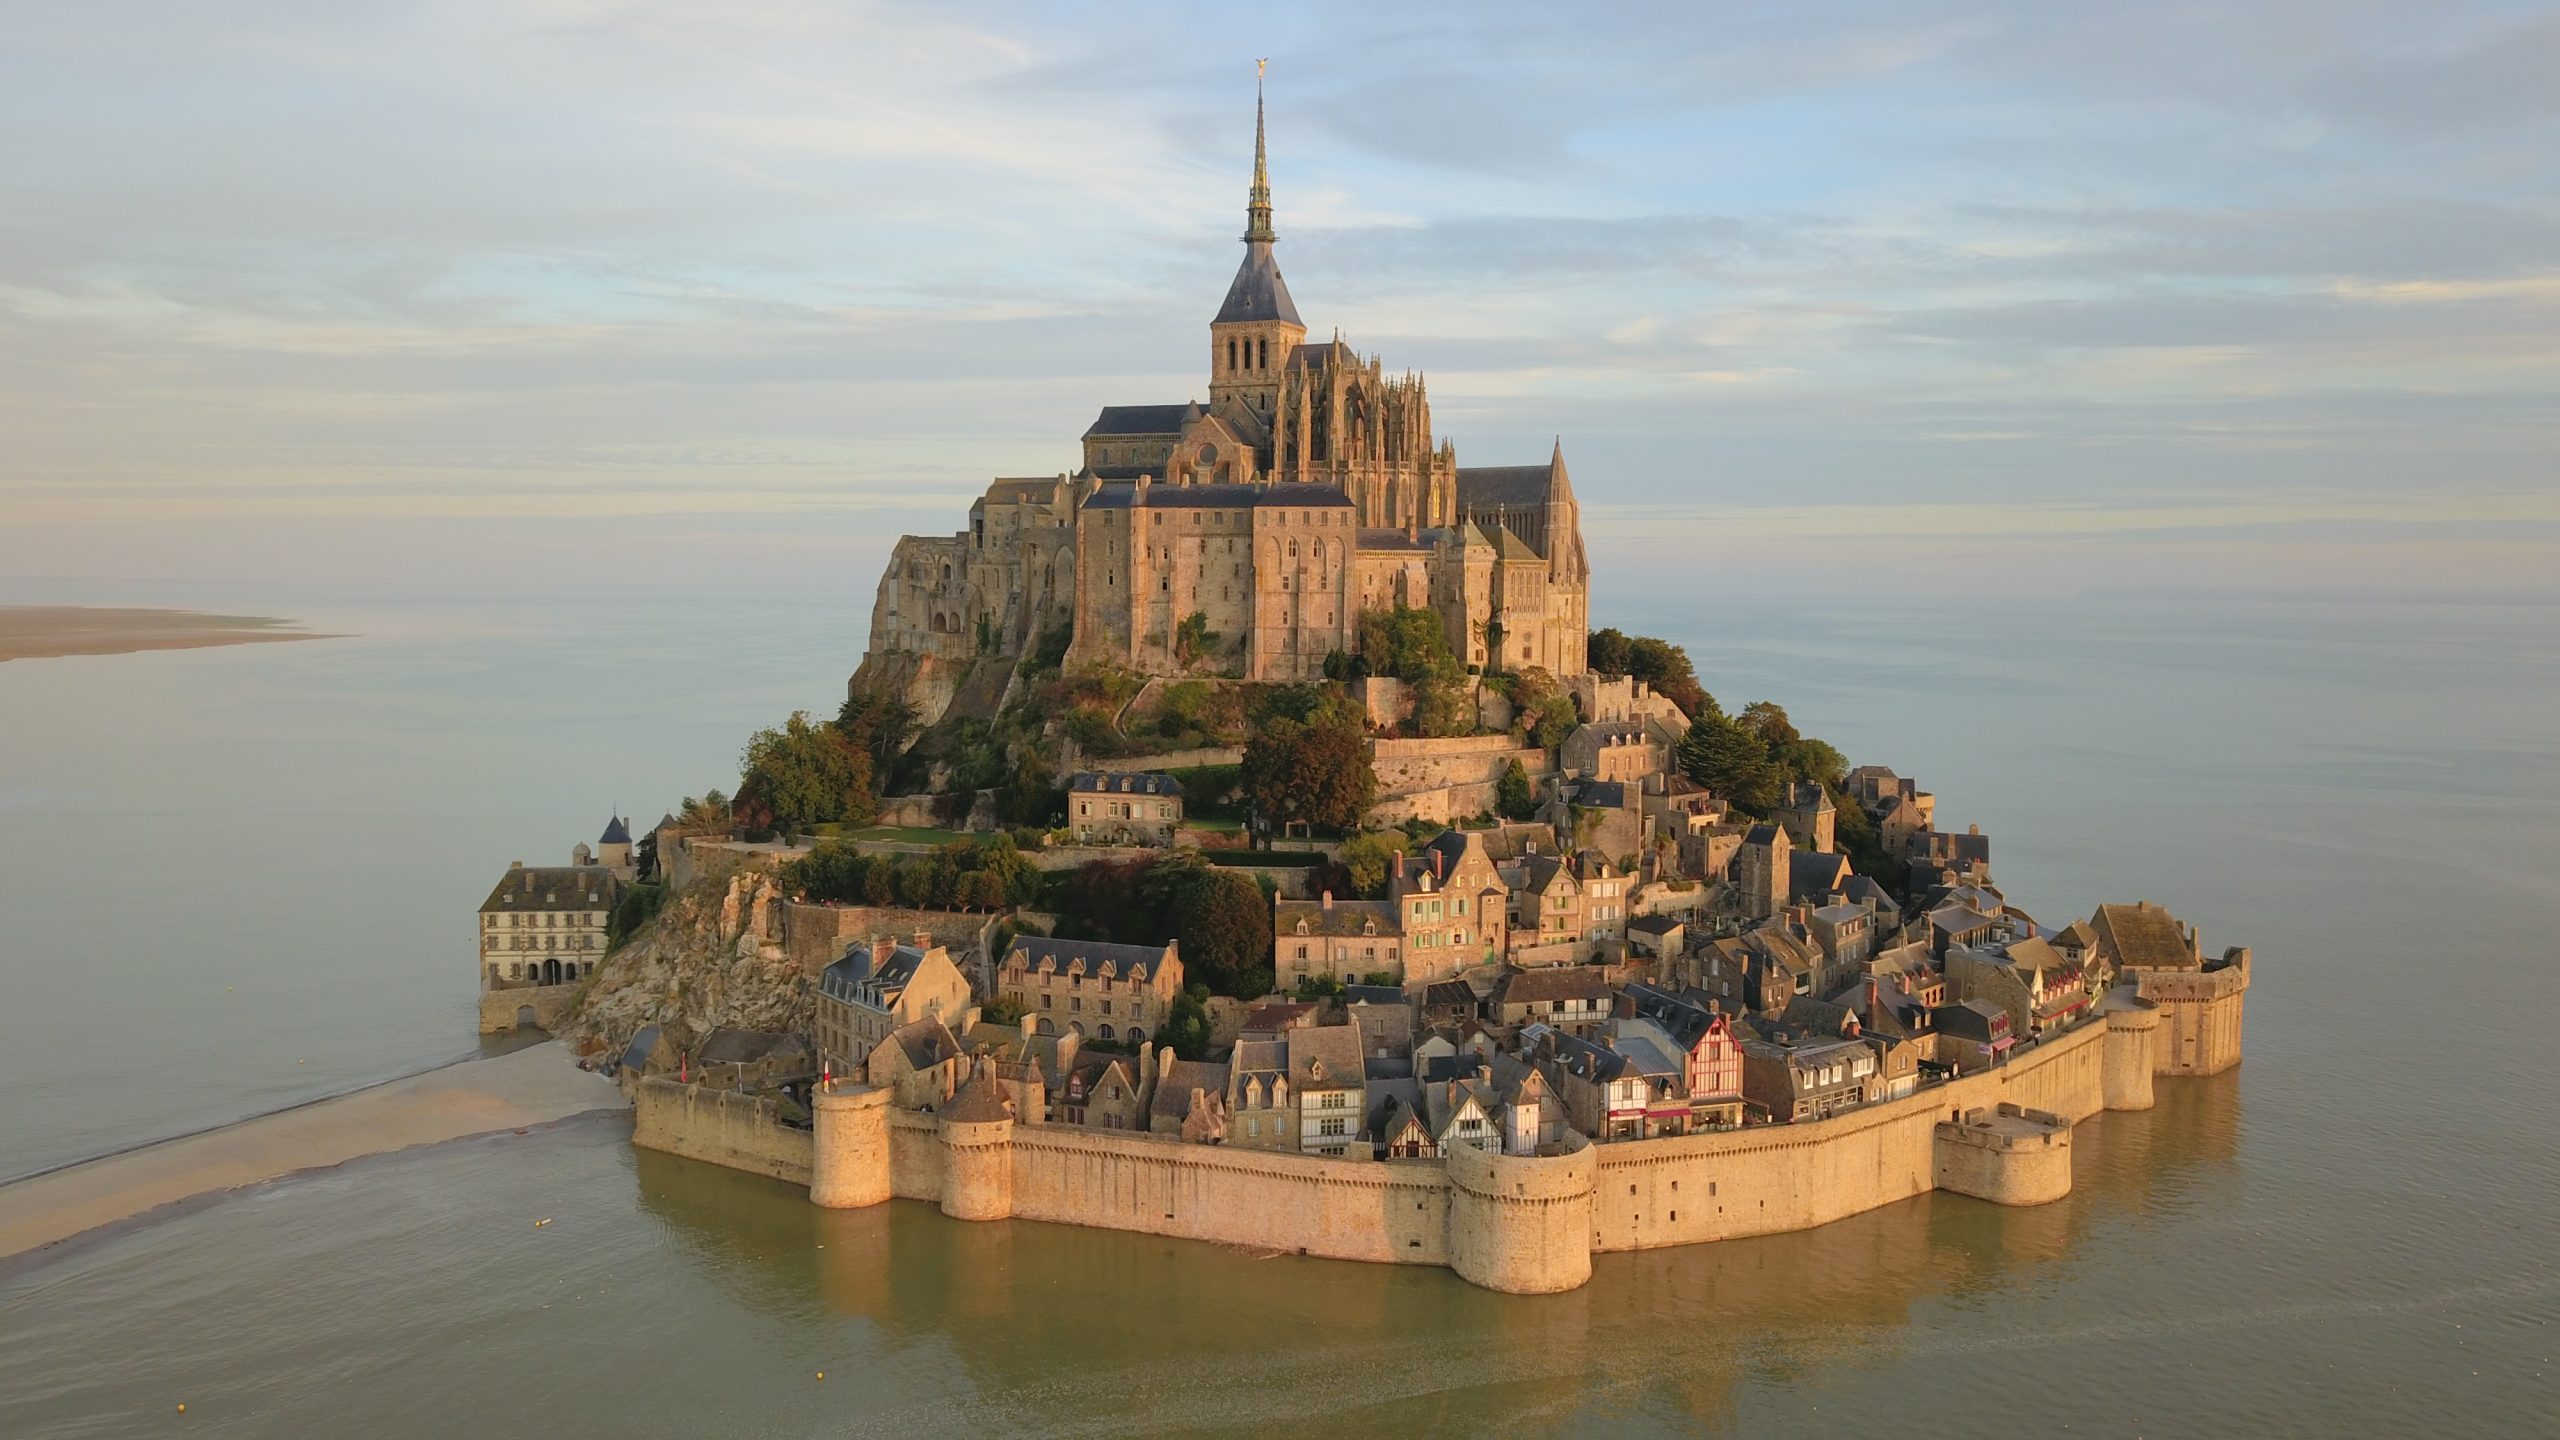 21 of the Great Fortresses Around the World